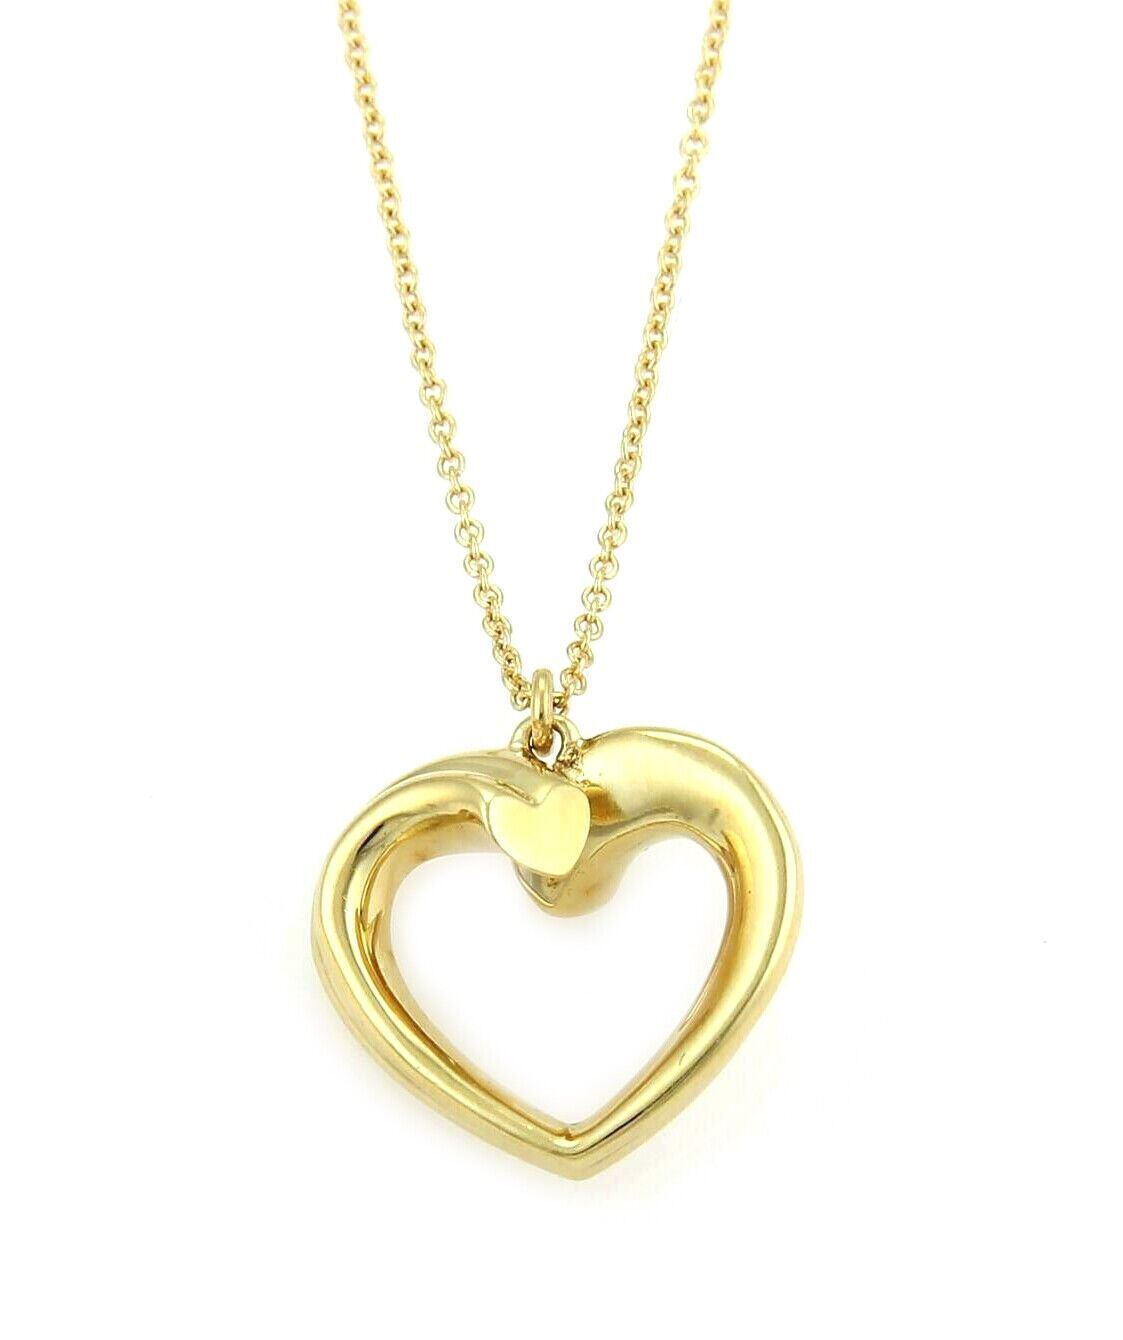 Tiffany & Co. Picasso Tenderness 18k Yellow Gold Heart Pendant Necklace | Necklaces | catalog, Designer Jewelry, Necklaces, Paloma Picasso, Pendants, Tenderness, Tiffany & Co. | Tiffany & Co.